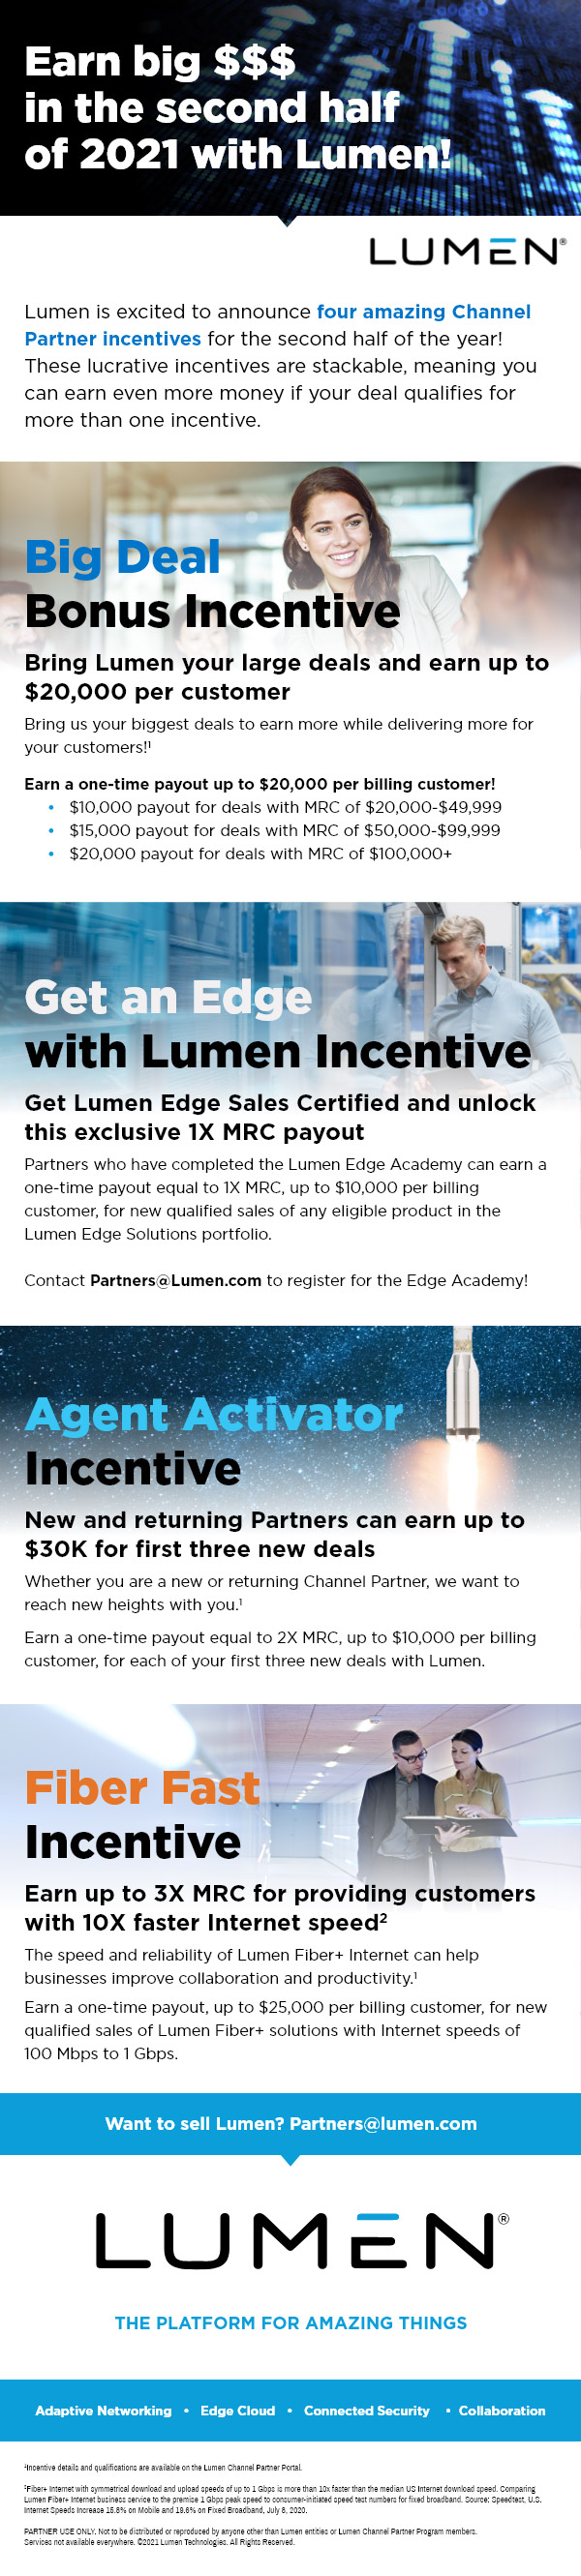 Earn big $$$ in the second half of 2021 with Lumen!